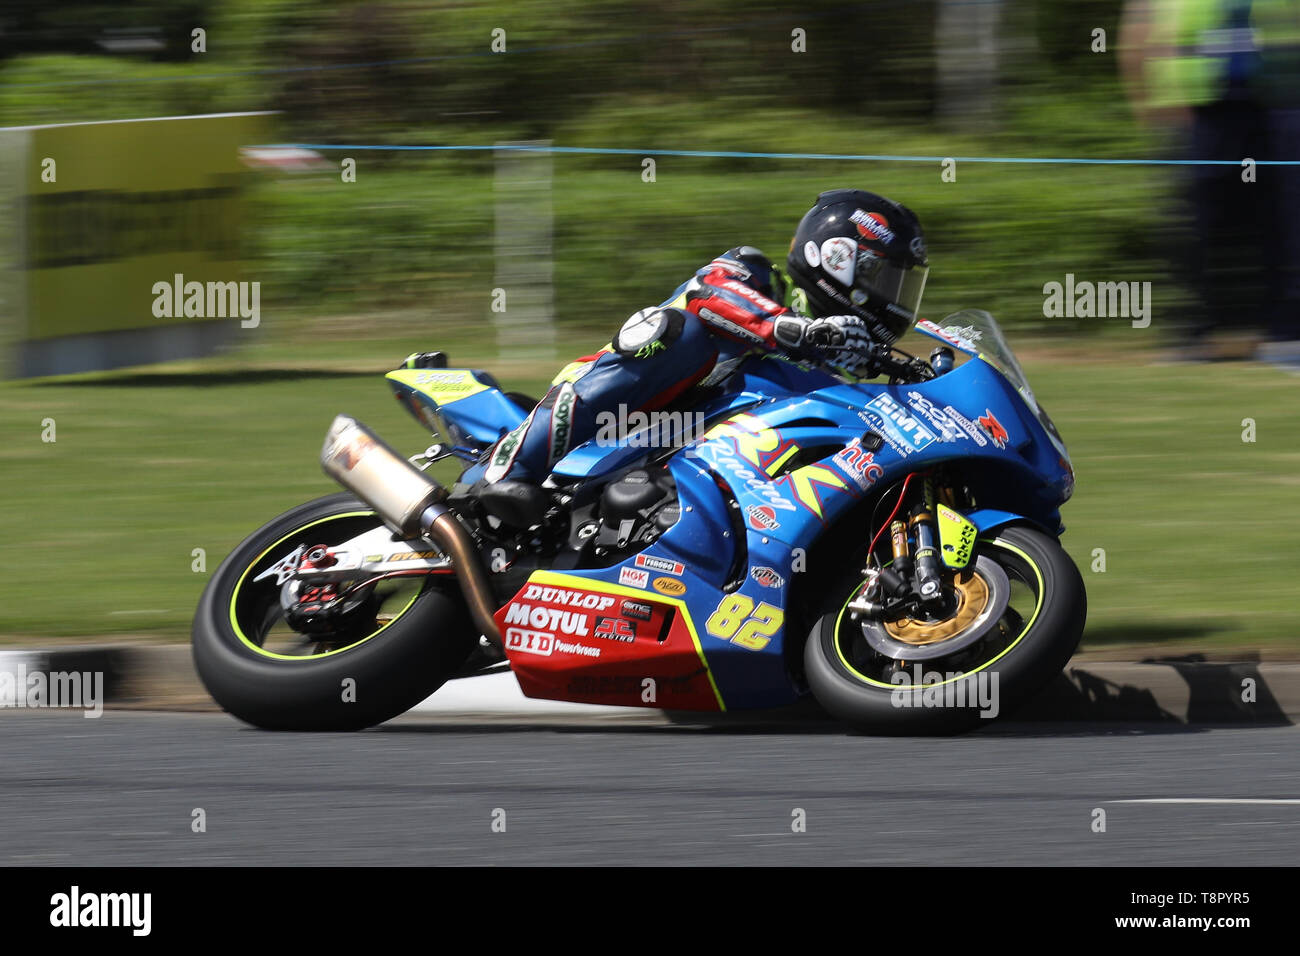 Portrush, Northern Ireland. 14th May, 2019. International North West 200 Motorcycle road racing, Tuesday practice; Derek Shiels on the Burrows Engineering/RK Racing Suzuki during the SuperBike practice session Credit: Action Plus Sports/Alamy Live News Stock Photo